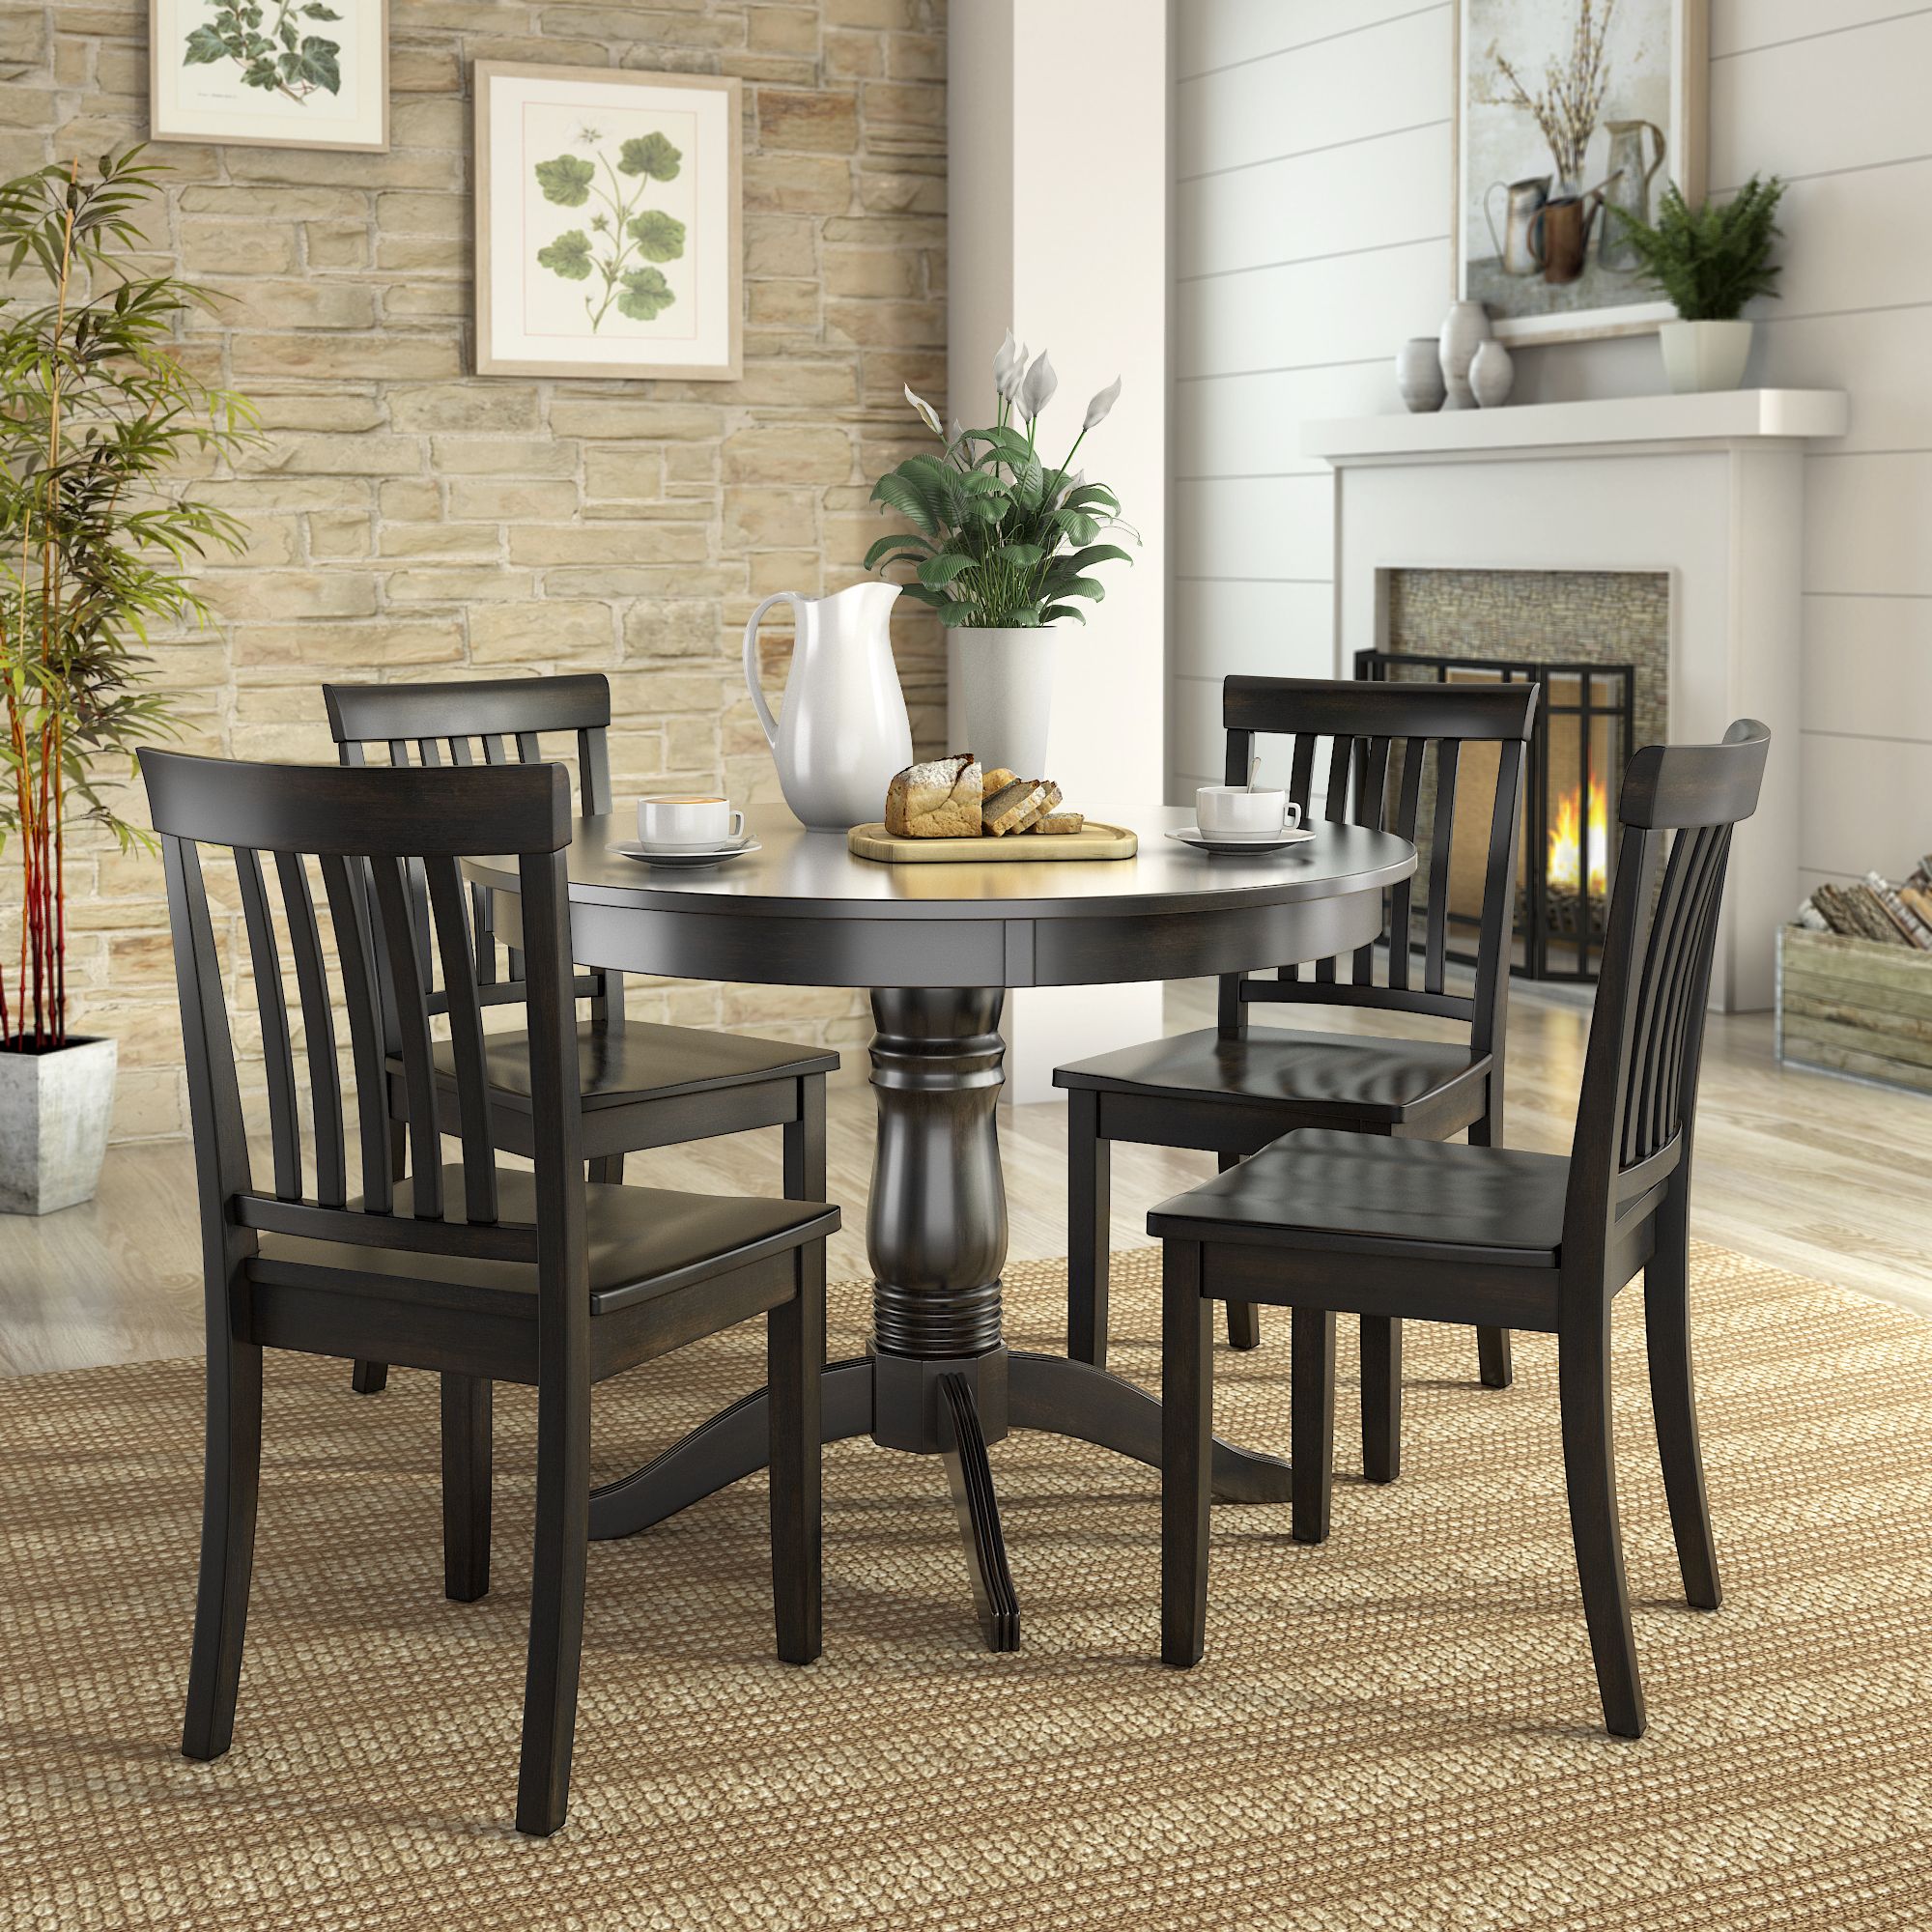 Lexington 5 Piece Wood Dining Set, Round Table And 4 Mission Back Inside 5 Piece Round Dining Sets (View 1 of 15)